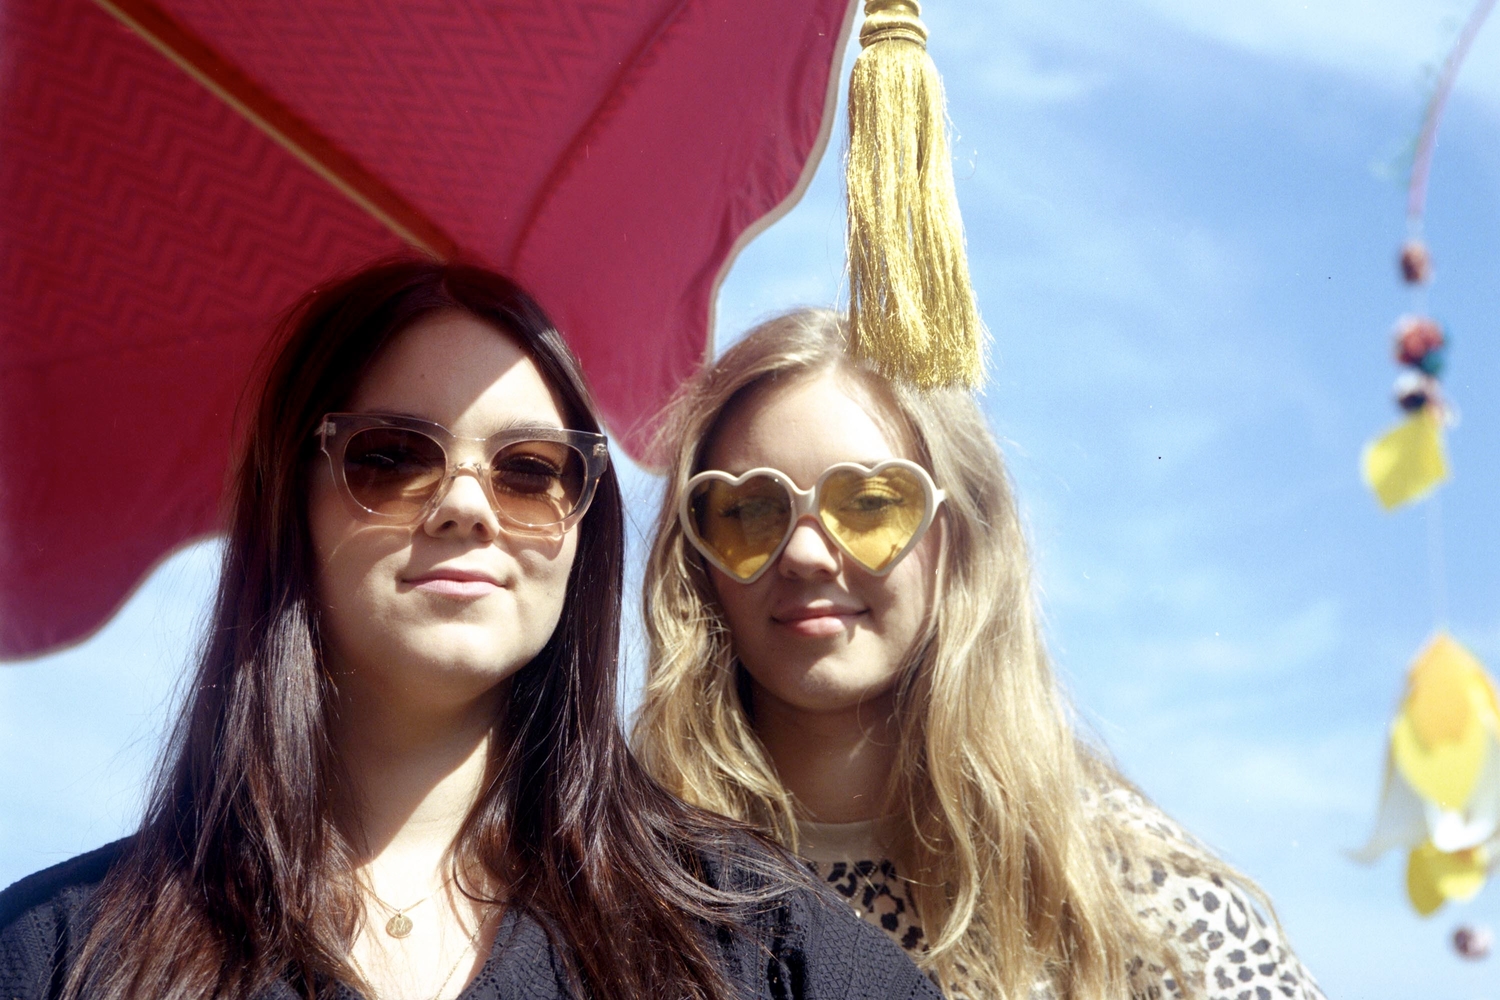 First Aid Kit: "The next record might not be as sad"